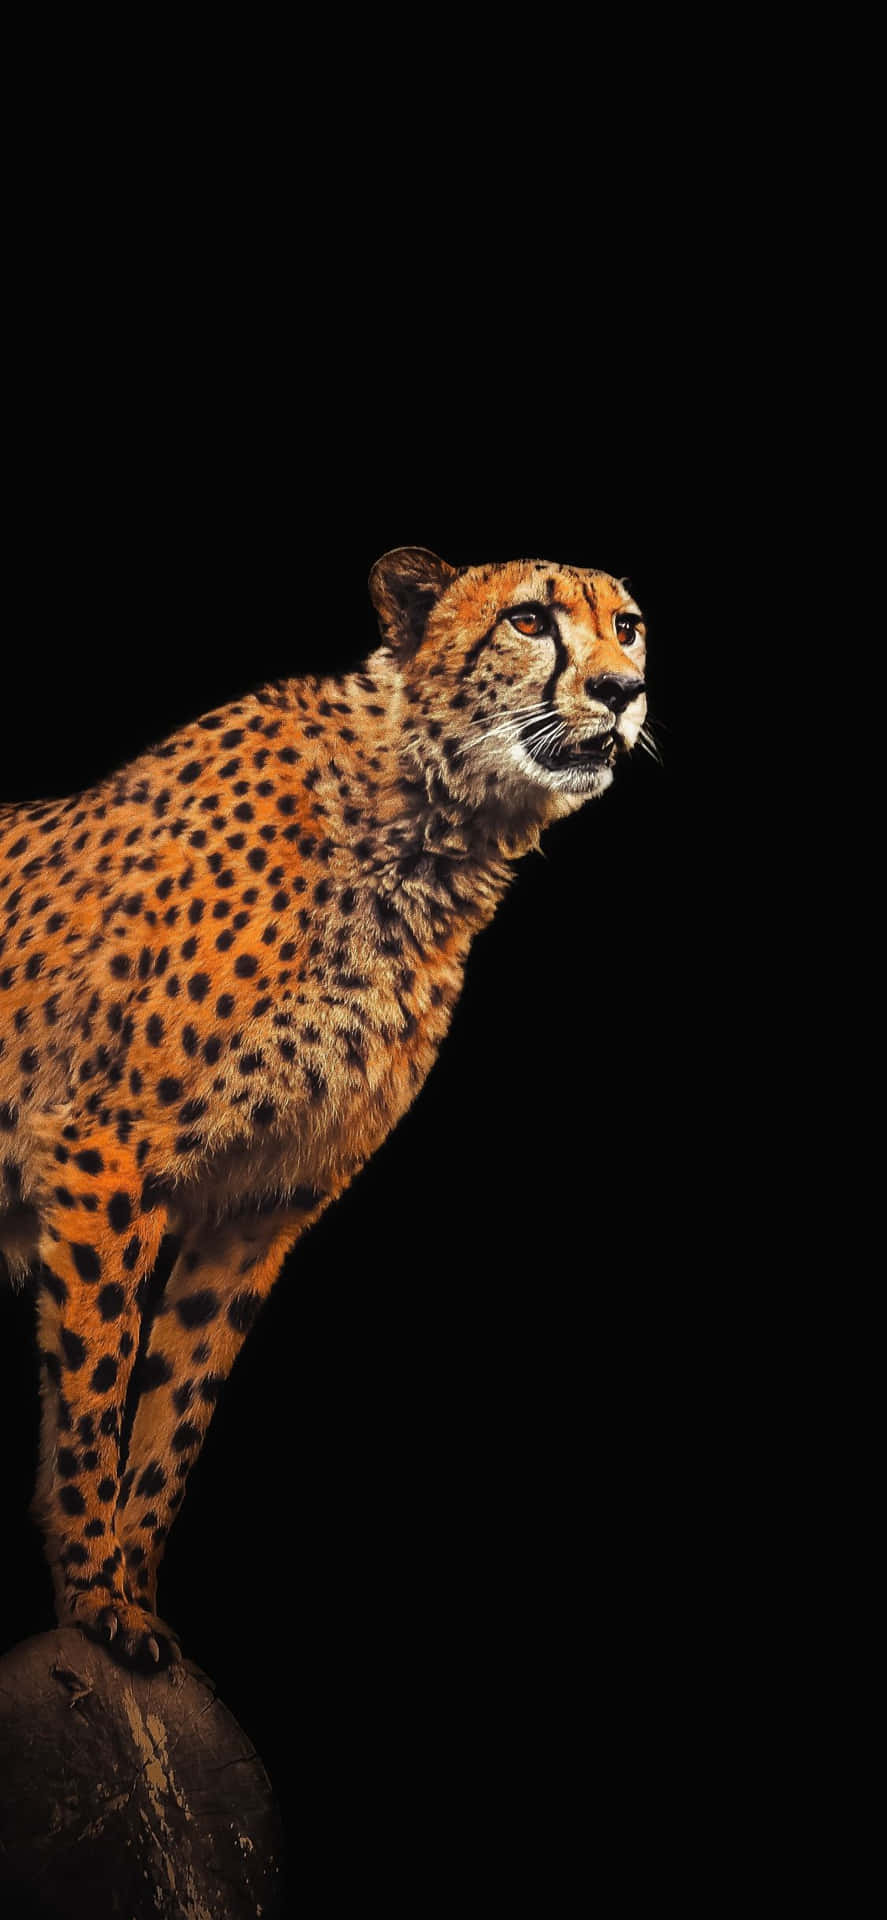 Cheetah On A Rock With A Black Background Wallpaper